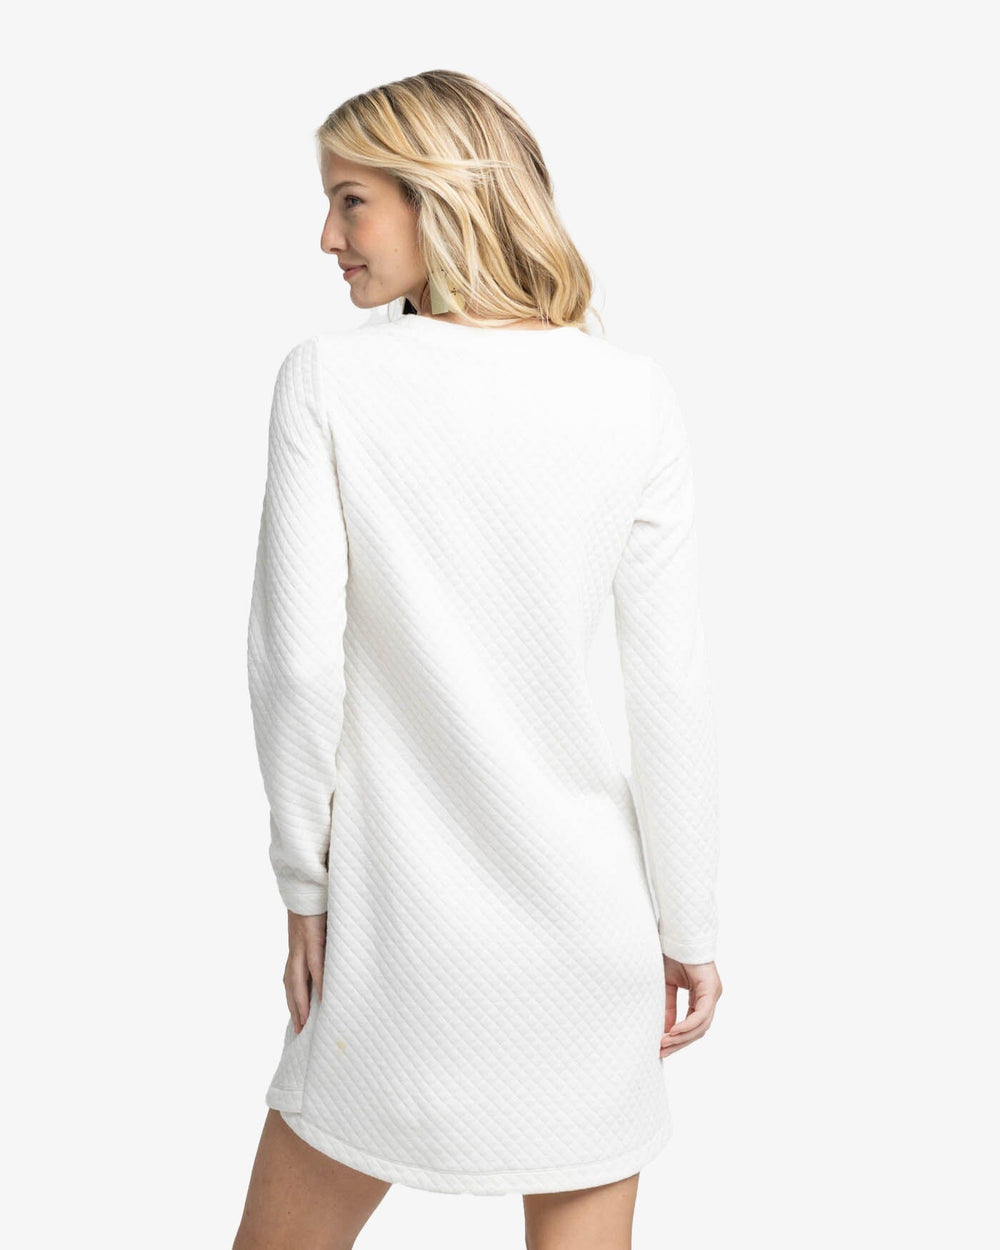 The back view of the Southern Tide Milani Texture Dress by Southern Tide - Marshmallow